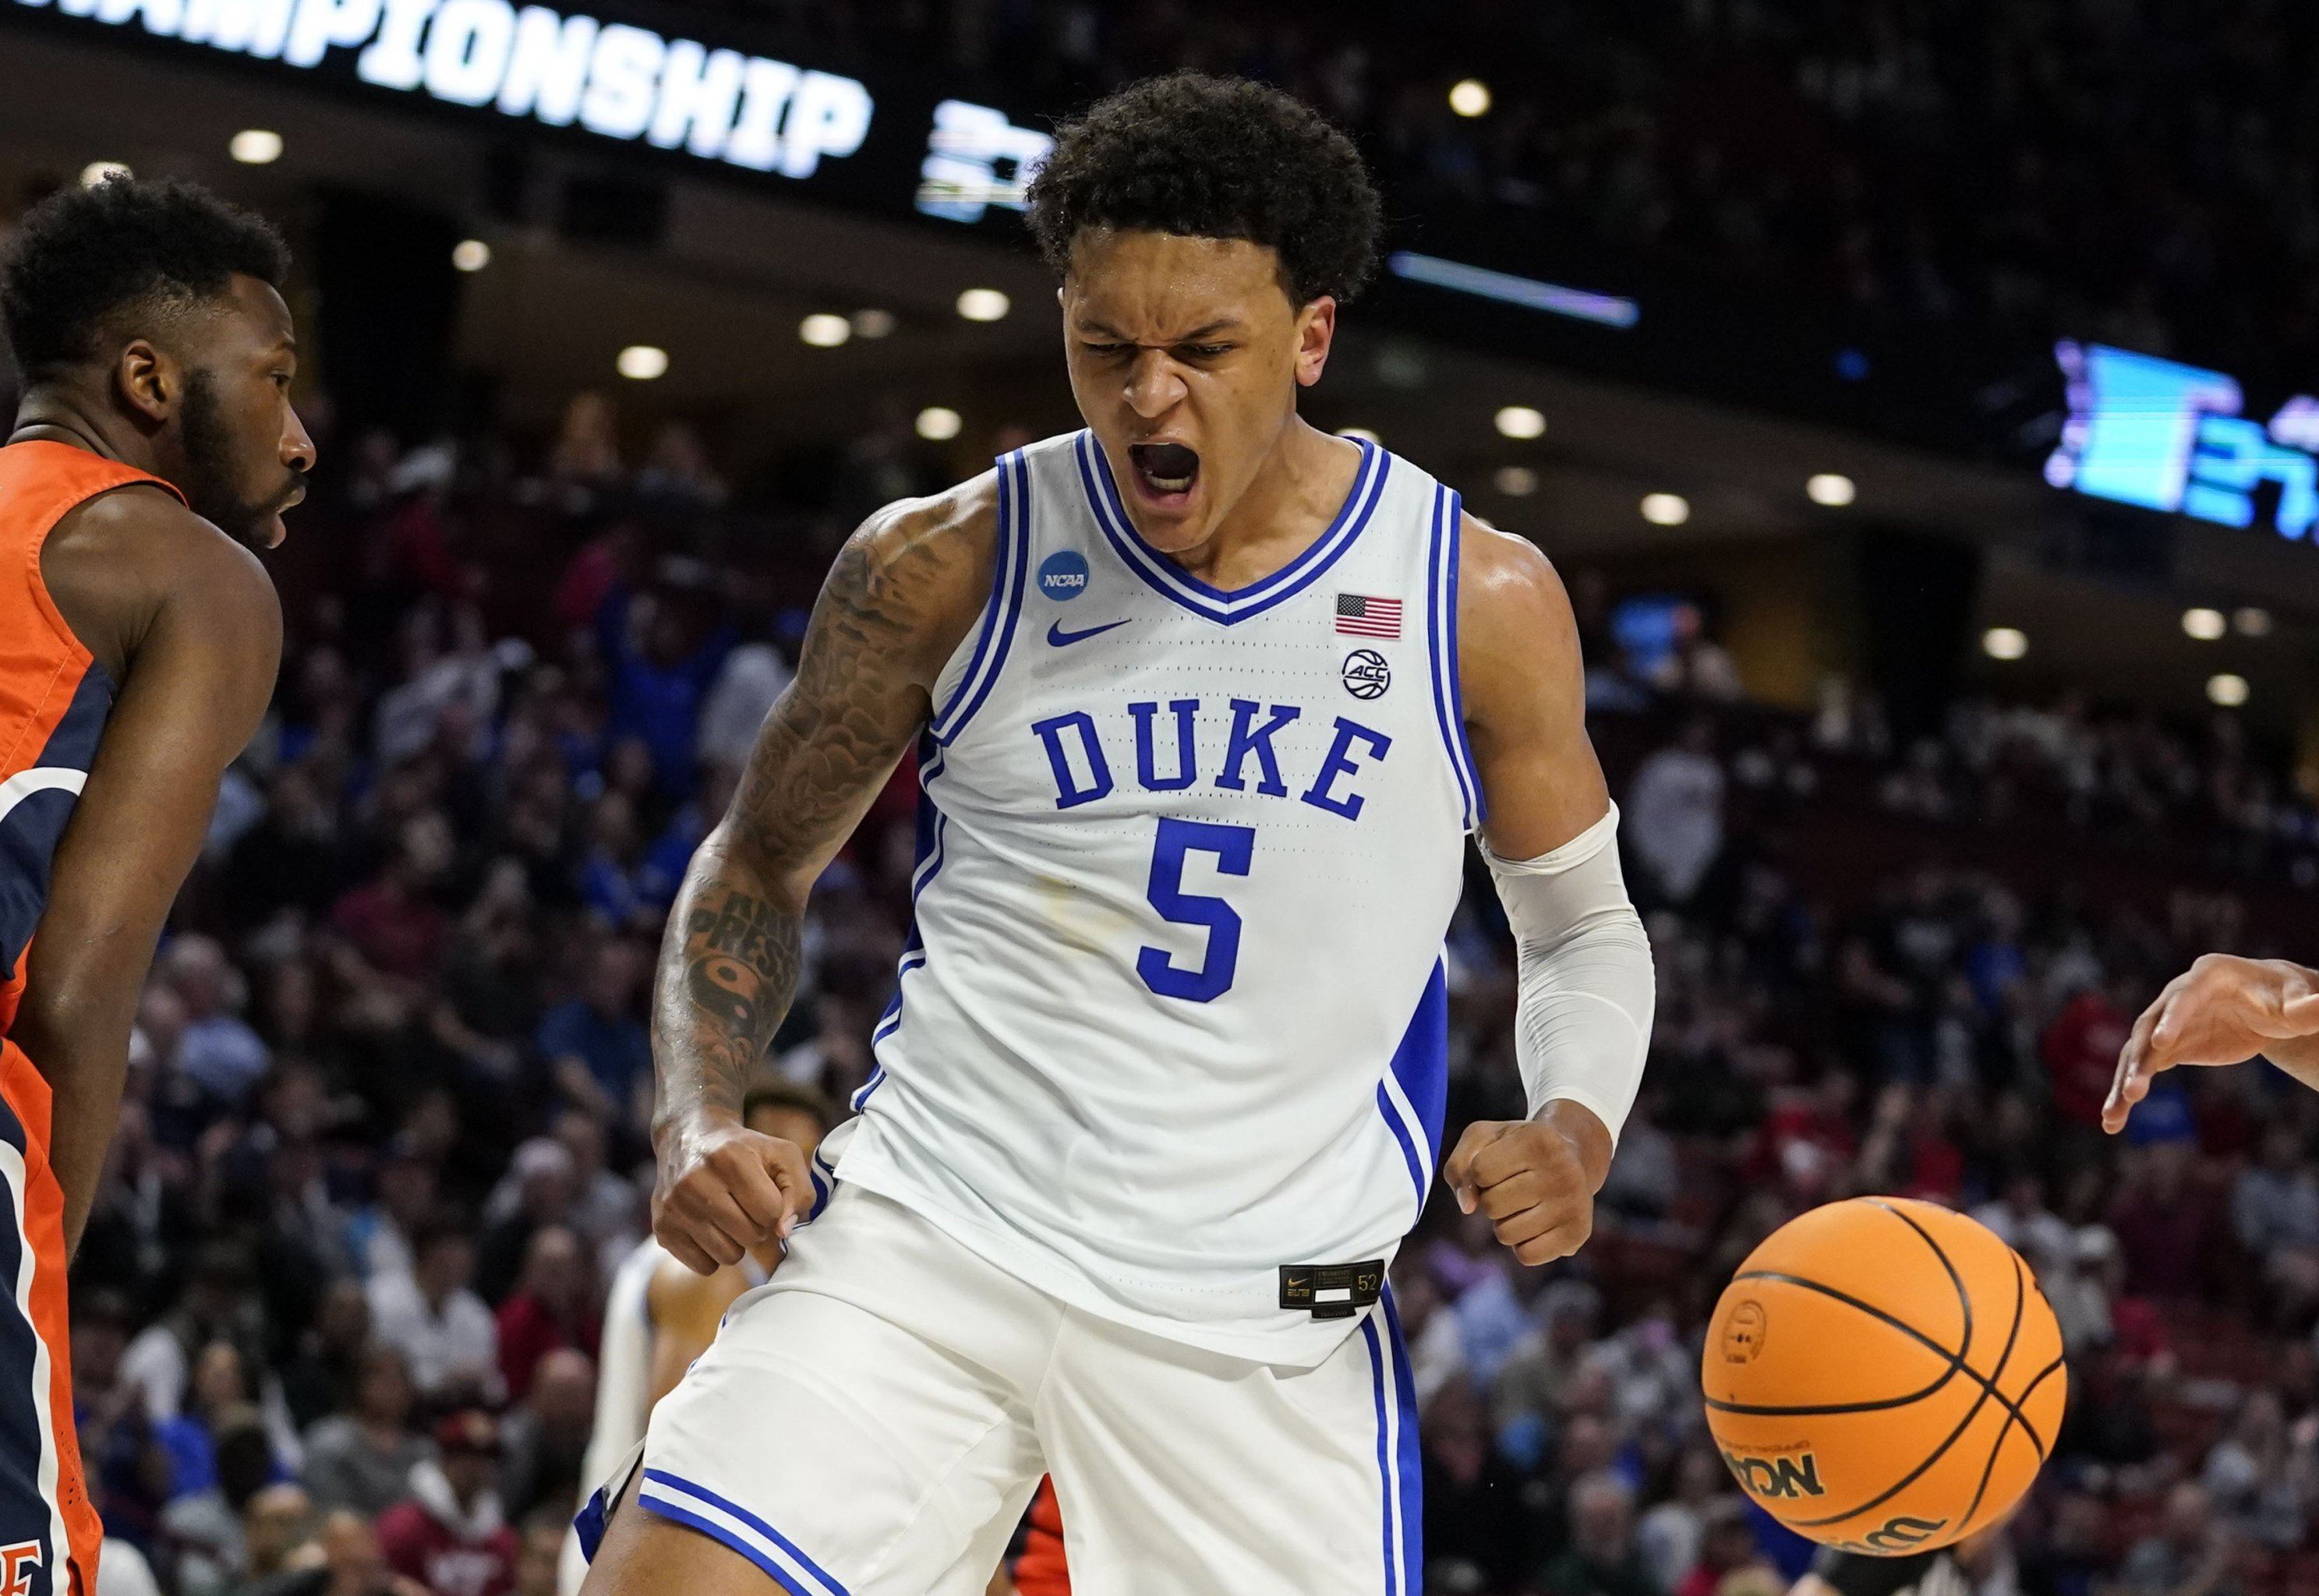 Duke's Paolo Banchero says he'd like to play with Spurs' Dejounte